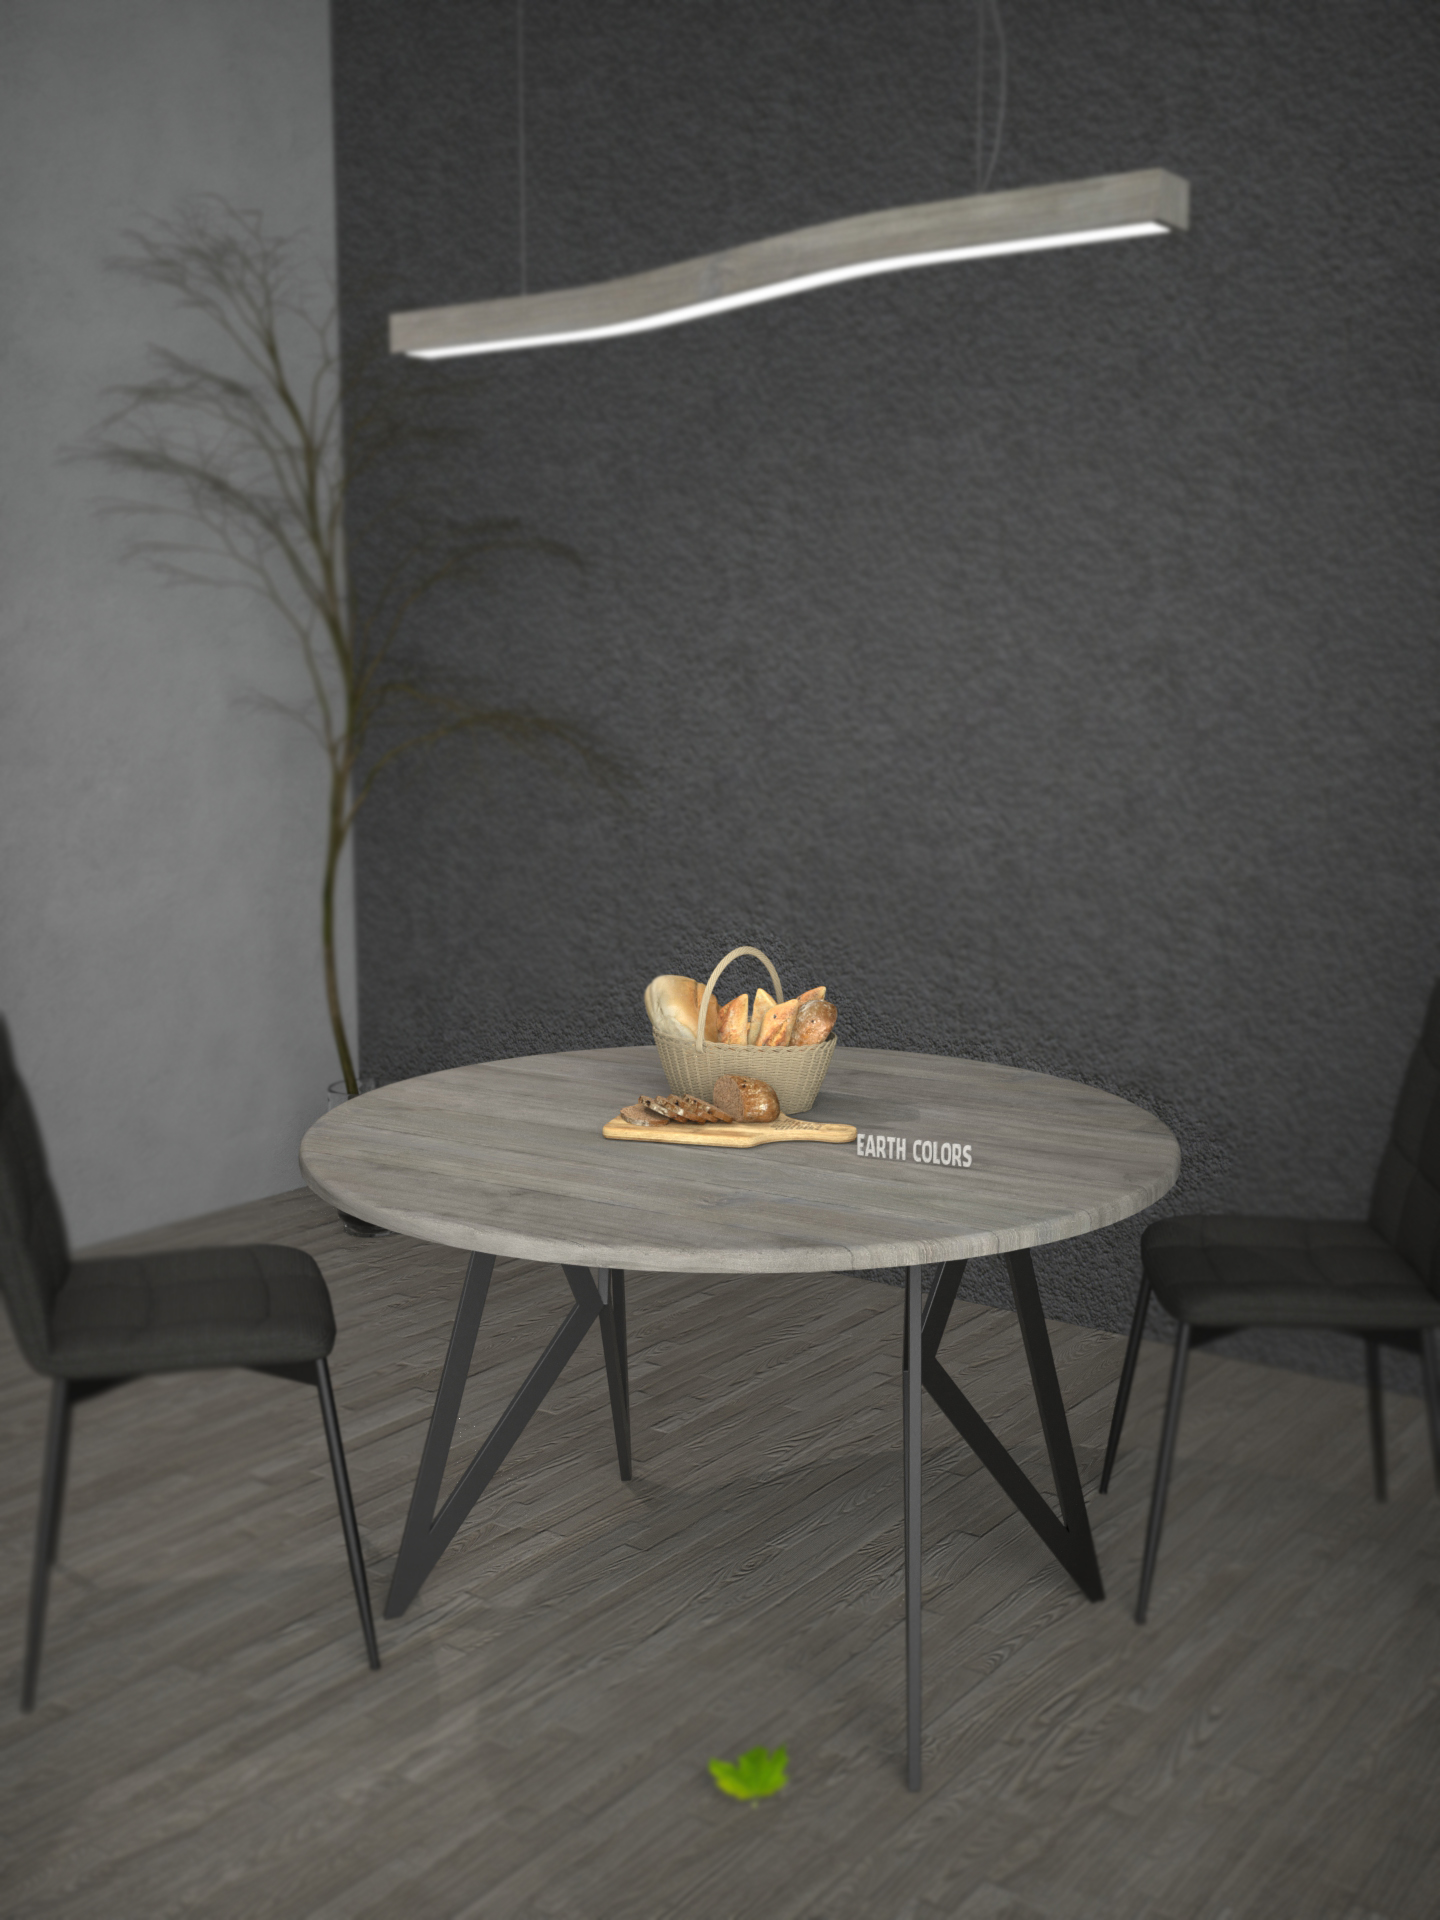 Stone round dining table